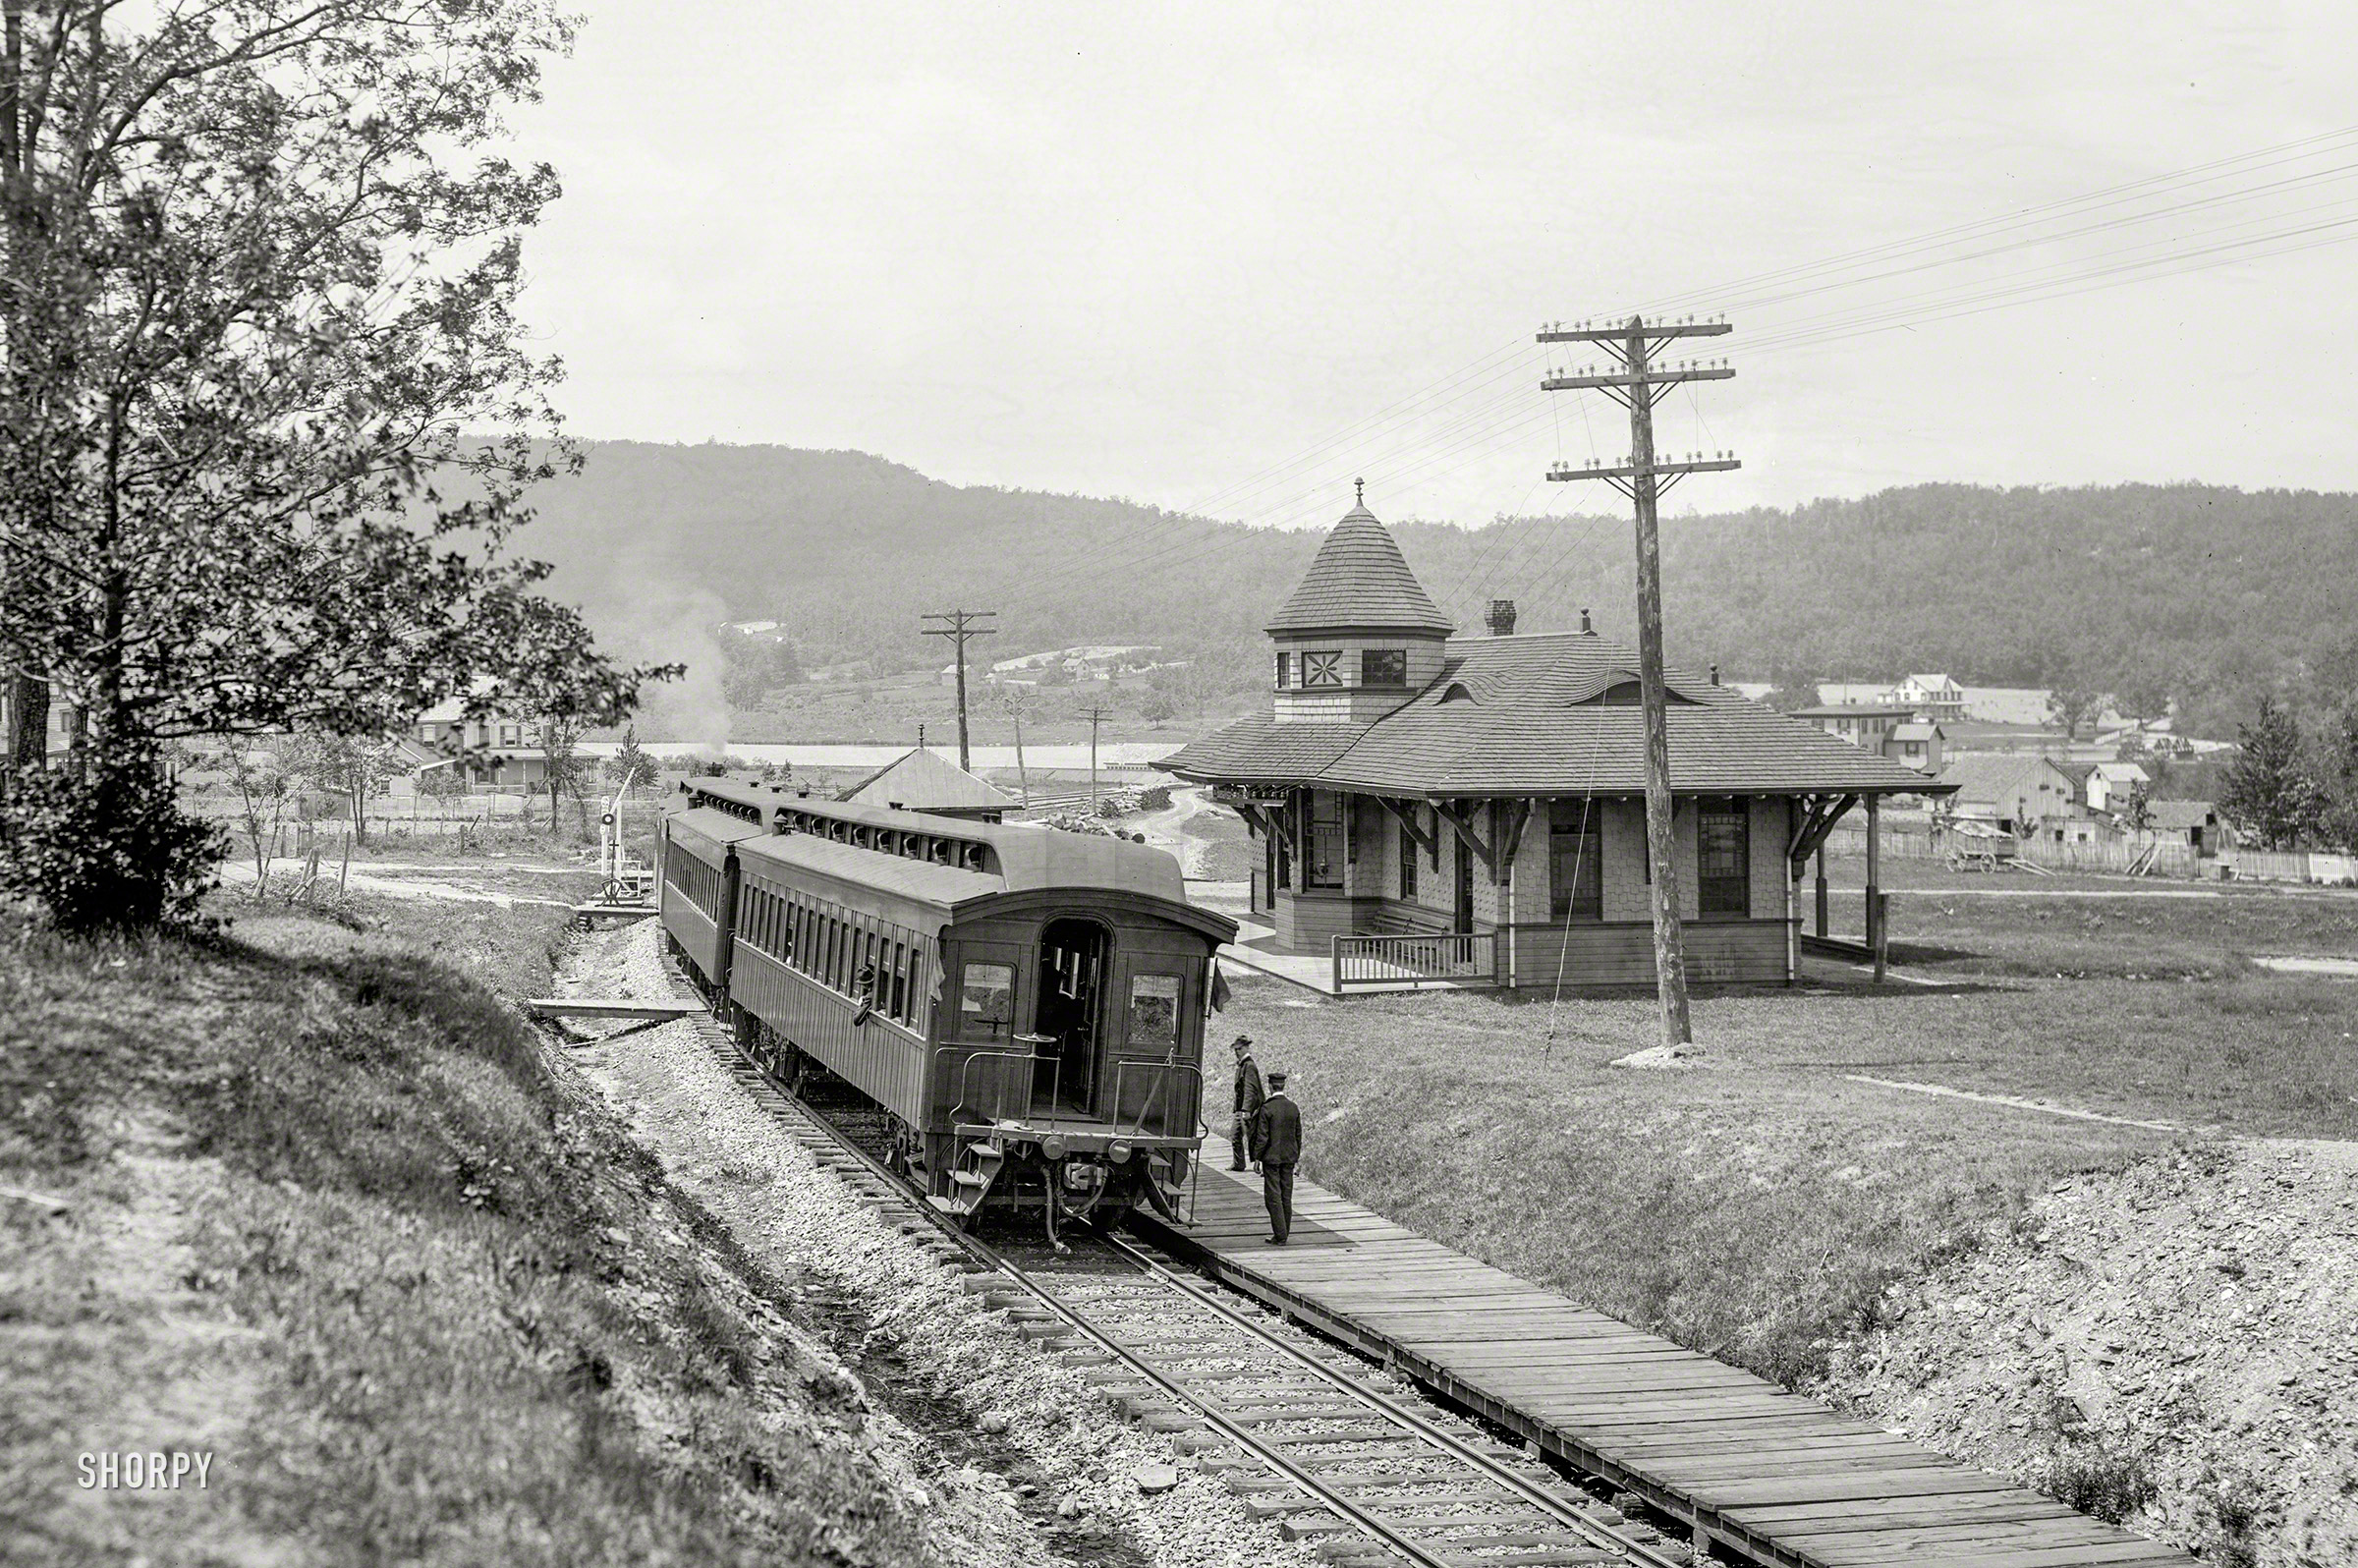 Washington County, Maryland, circa 1905. "Buena Vista Springs station at Pen-Mar." A Blue Ridge mountain resort, developed by the Western Maryland Railway, that took its name from the two neighboring states. 8x10 inch dry plate glass negative, Detroit Publishing Company. View full size.